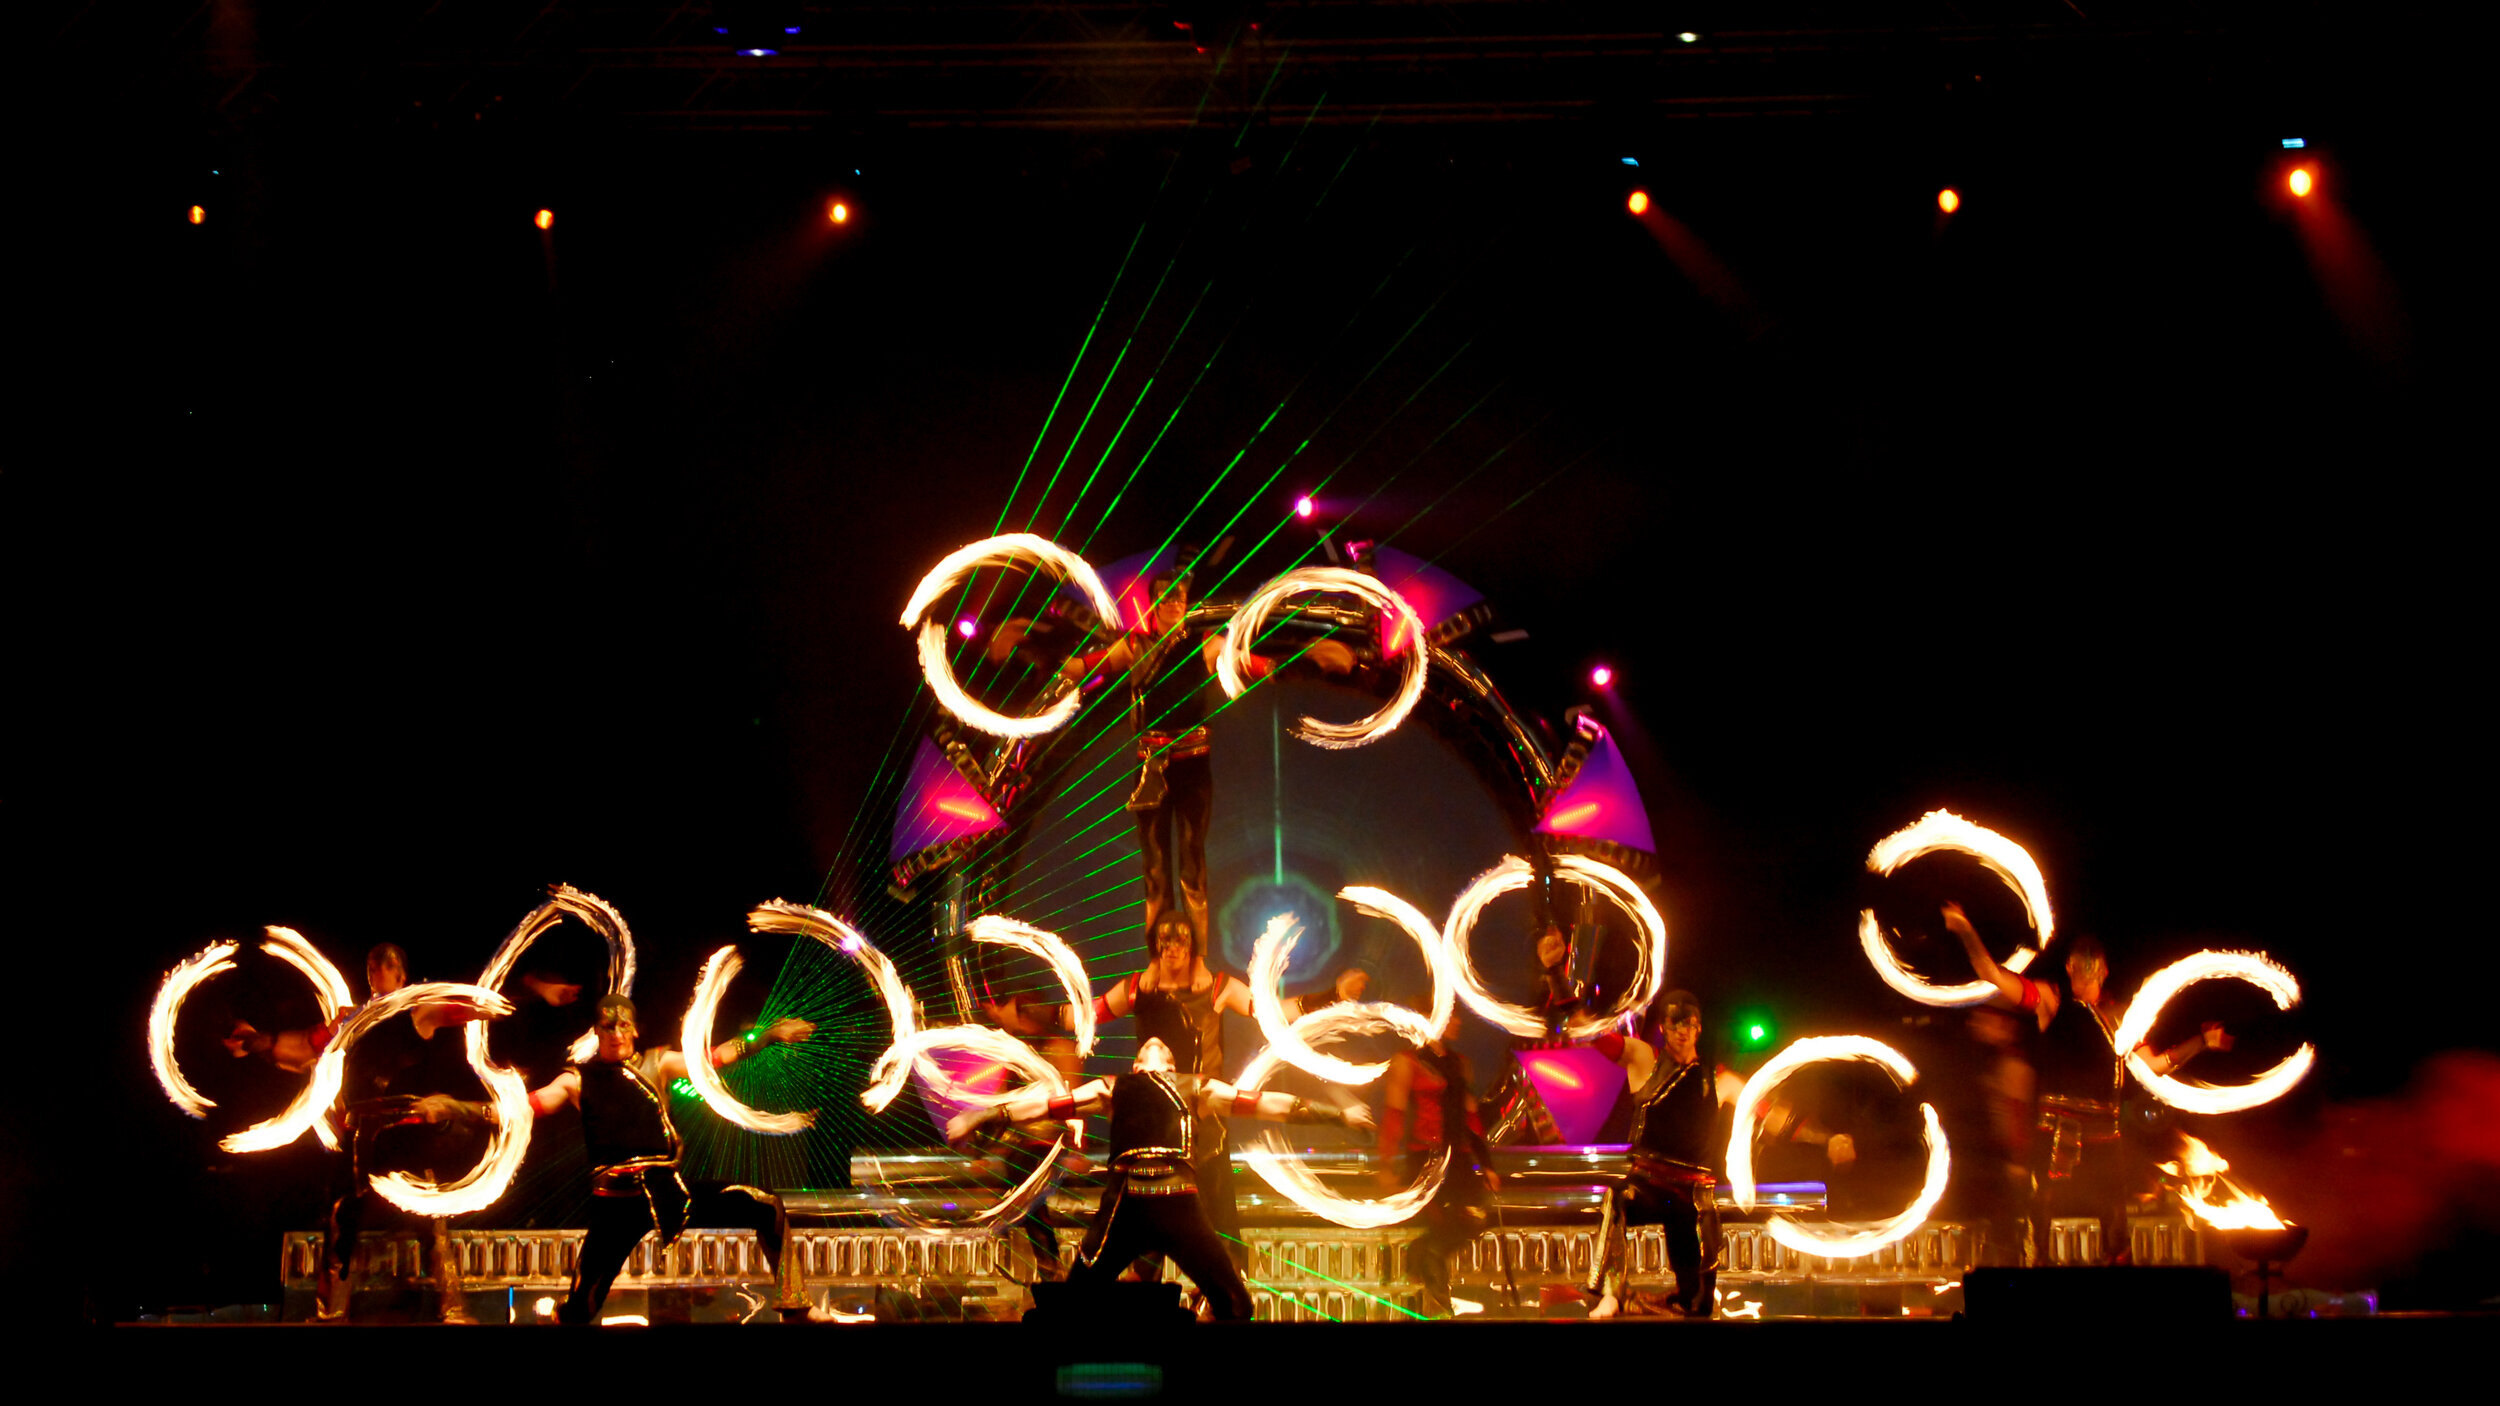 Vegas Style Fire Dancers, Human Pyramid and Lasers, Circus Fire Show, Corporate Event